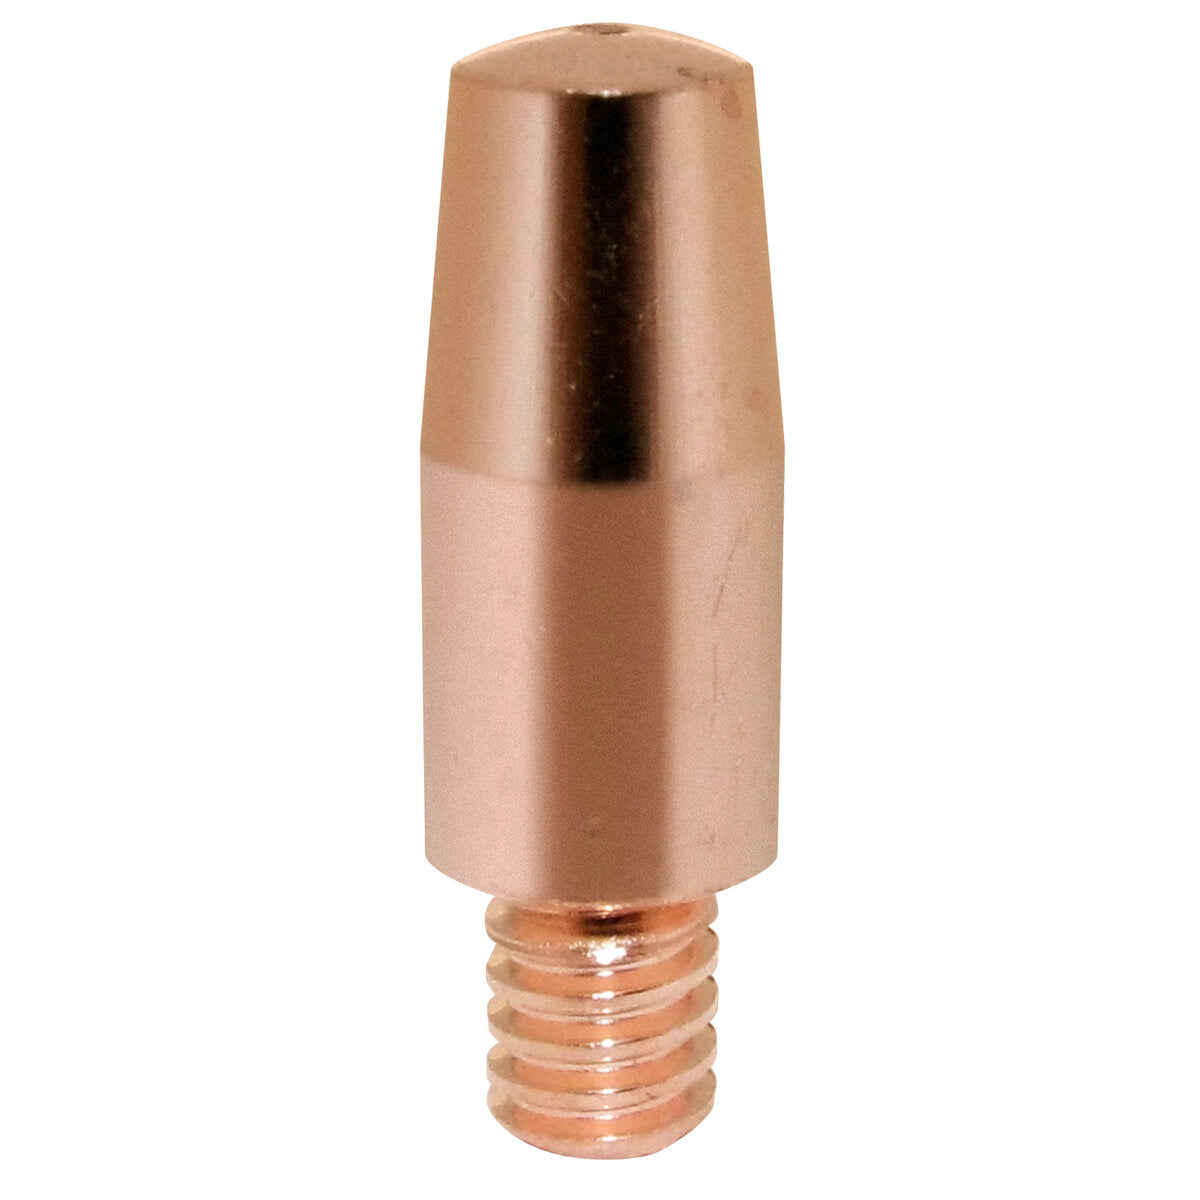 Lincoln Electric - Copper Plus® Contact Tip - 350A, Standard, 0.035 in (100/pack) - KP2744-035-B100